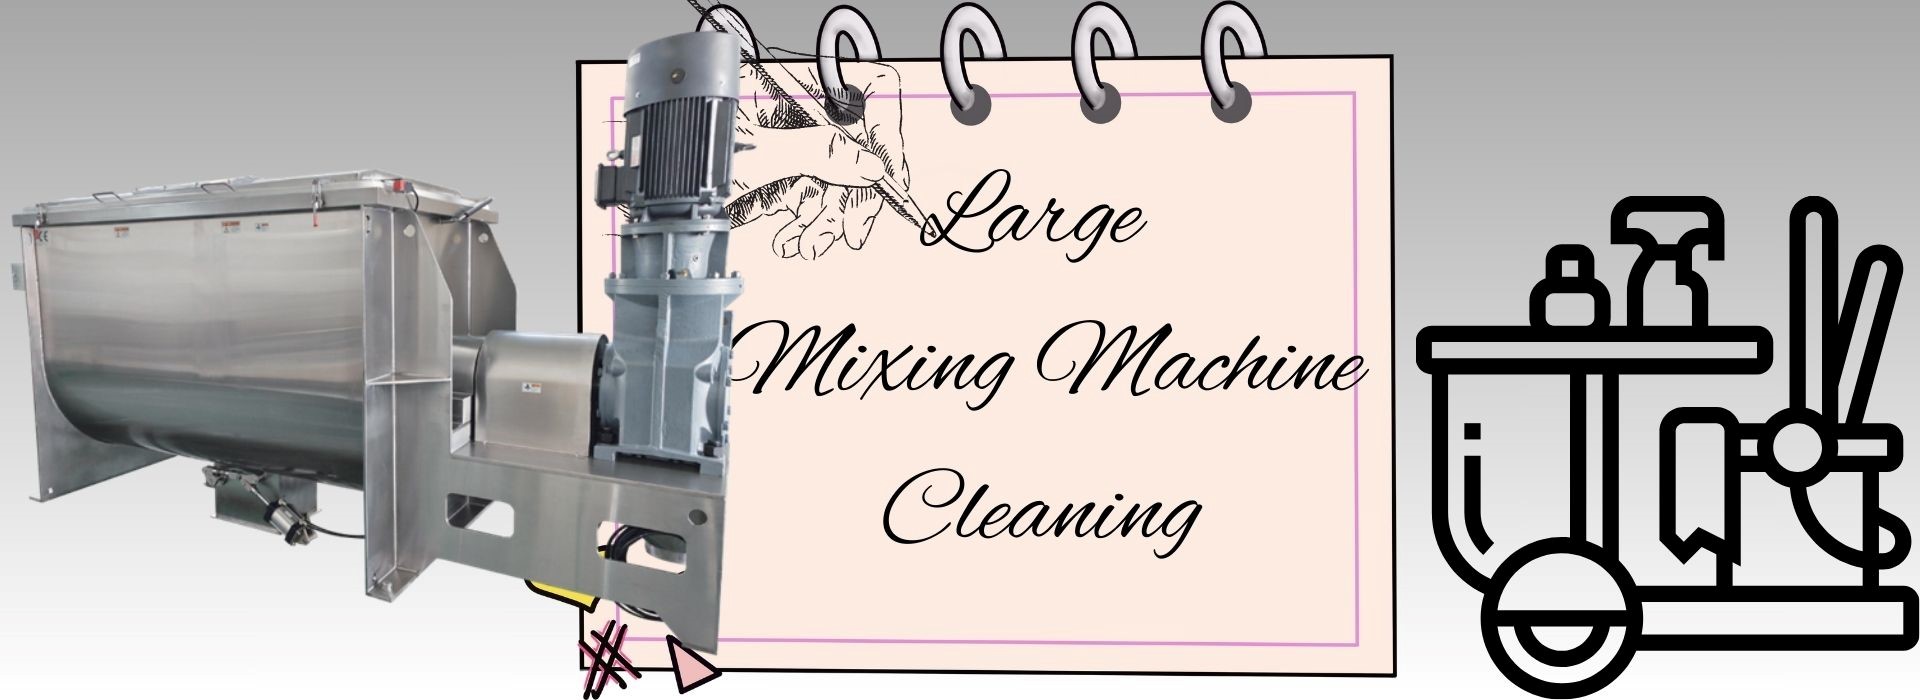 5 Methods for Cleaning the Large Mixing Machine1